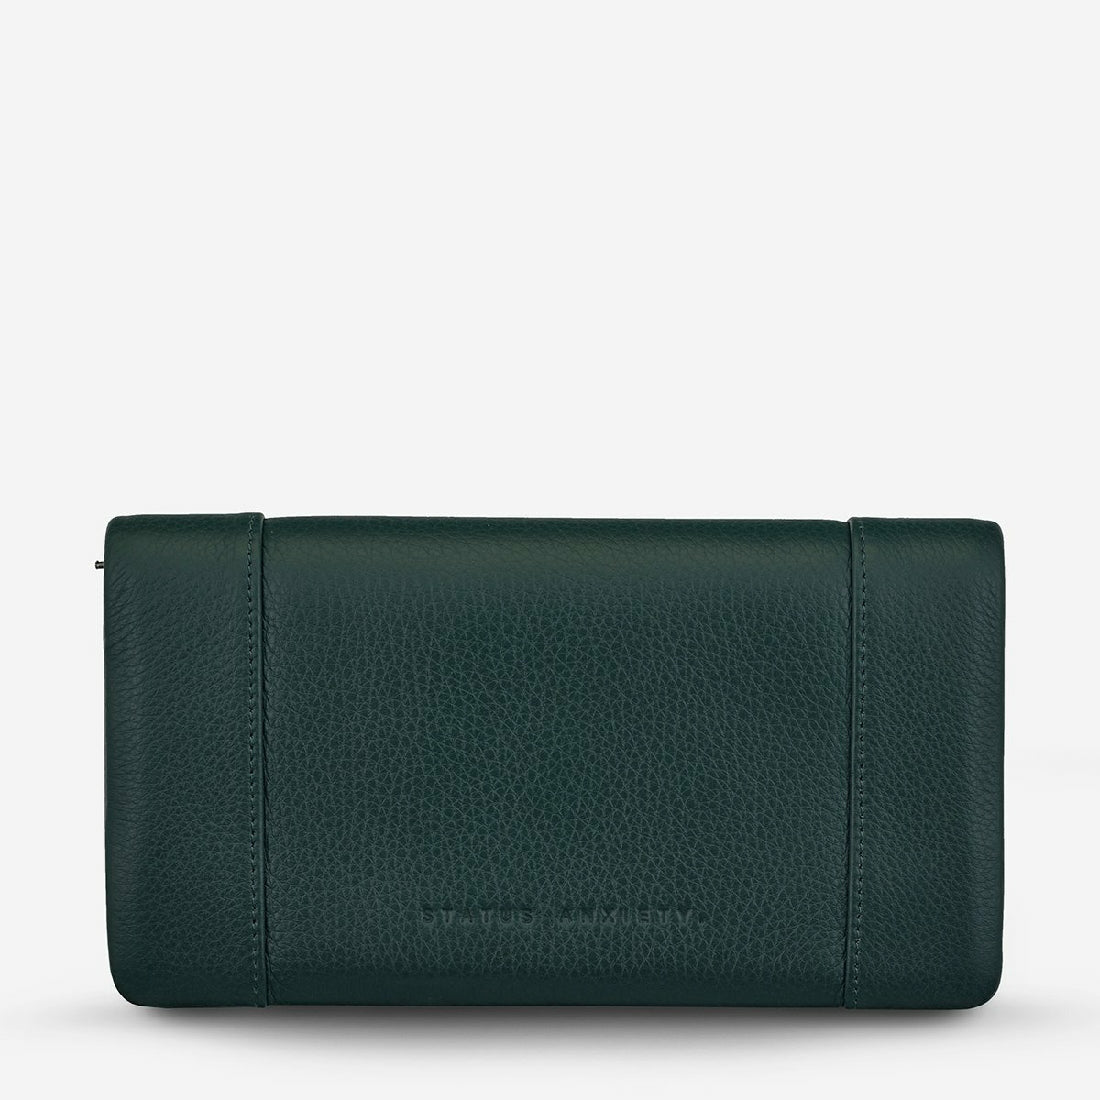 Status Anxiety Some Type Of Love Wallet - Little Extras Lifestyle Boutique